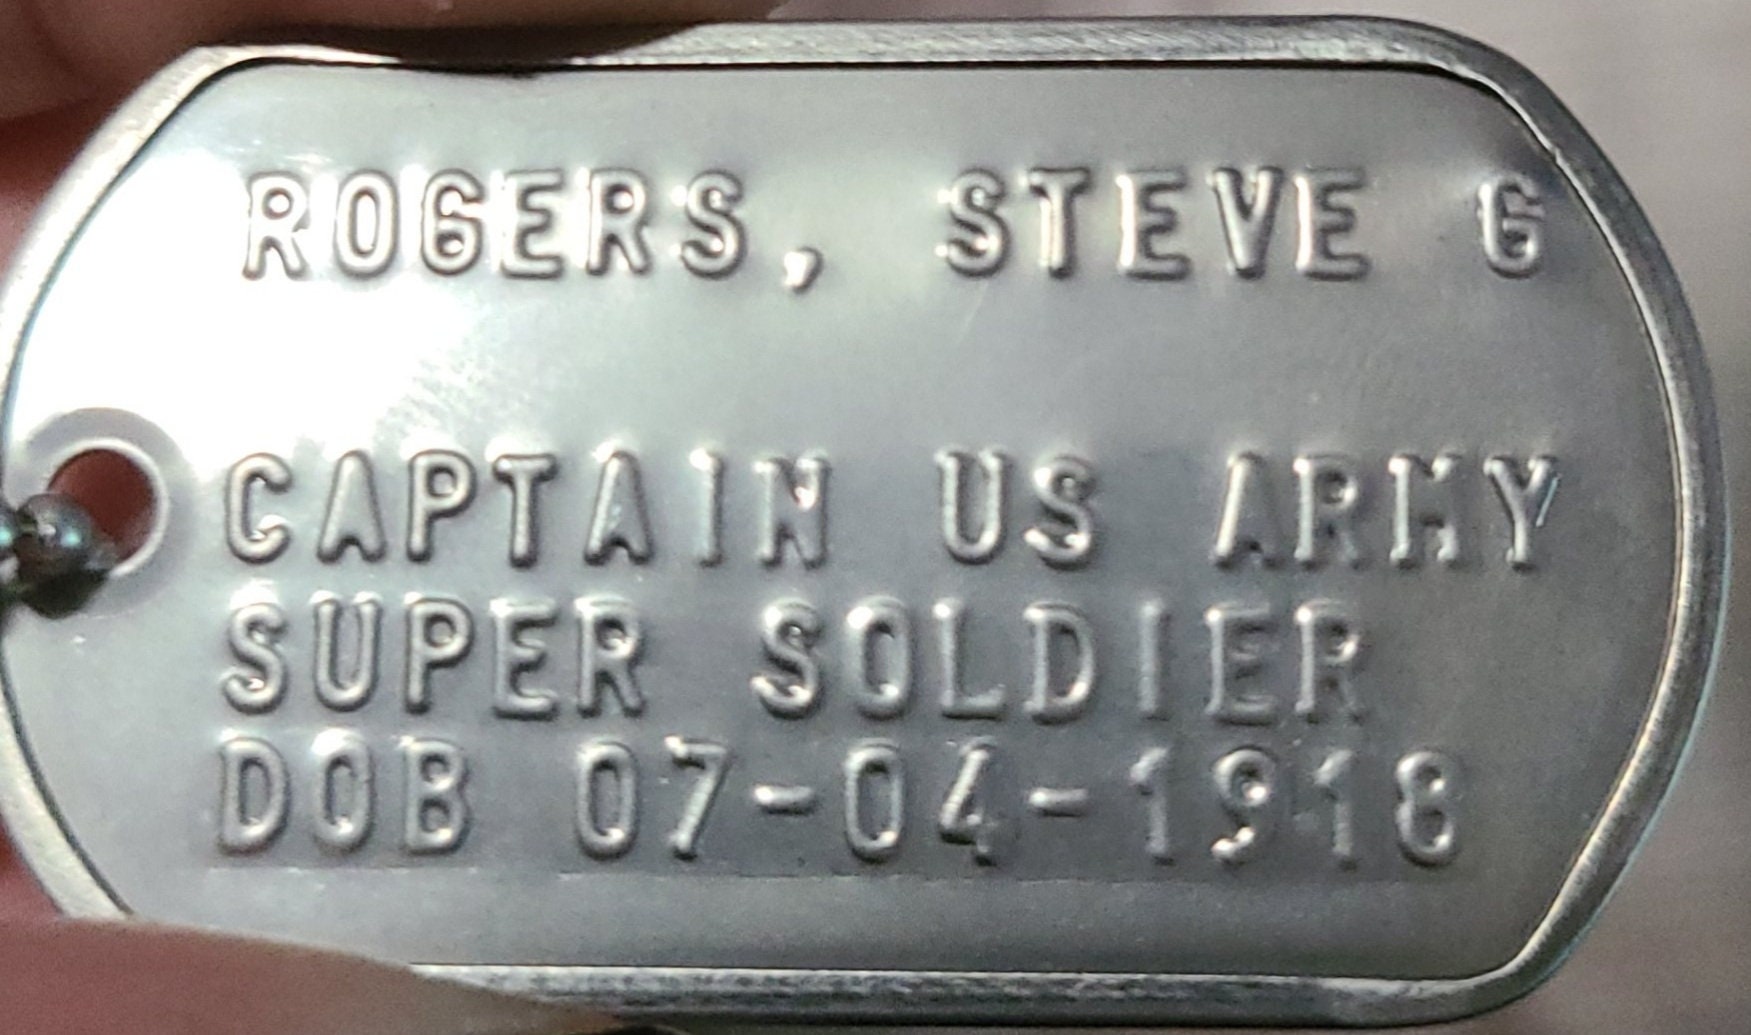 Bucky Barnes Dog Tag Stephen Rogers Dog Tag WWII Style 